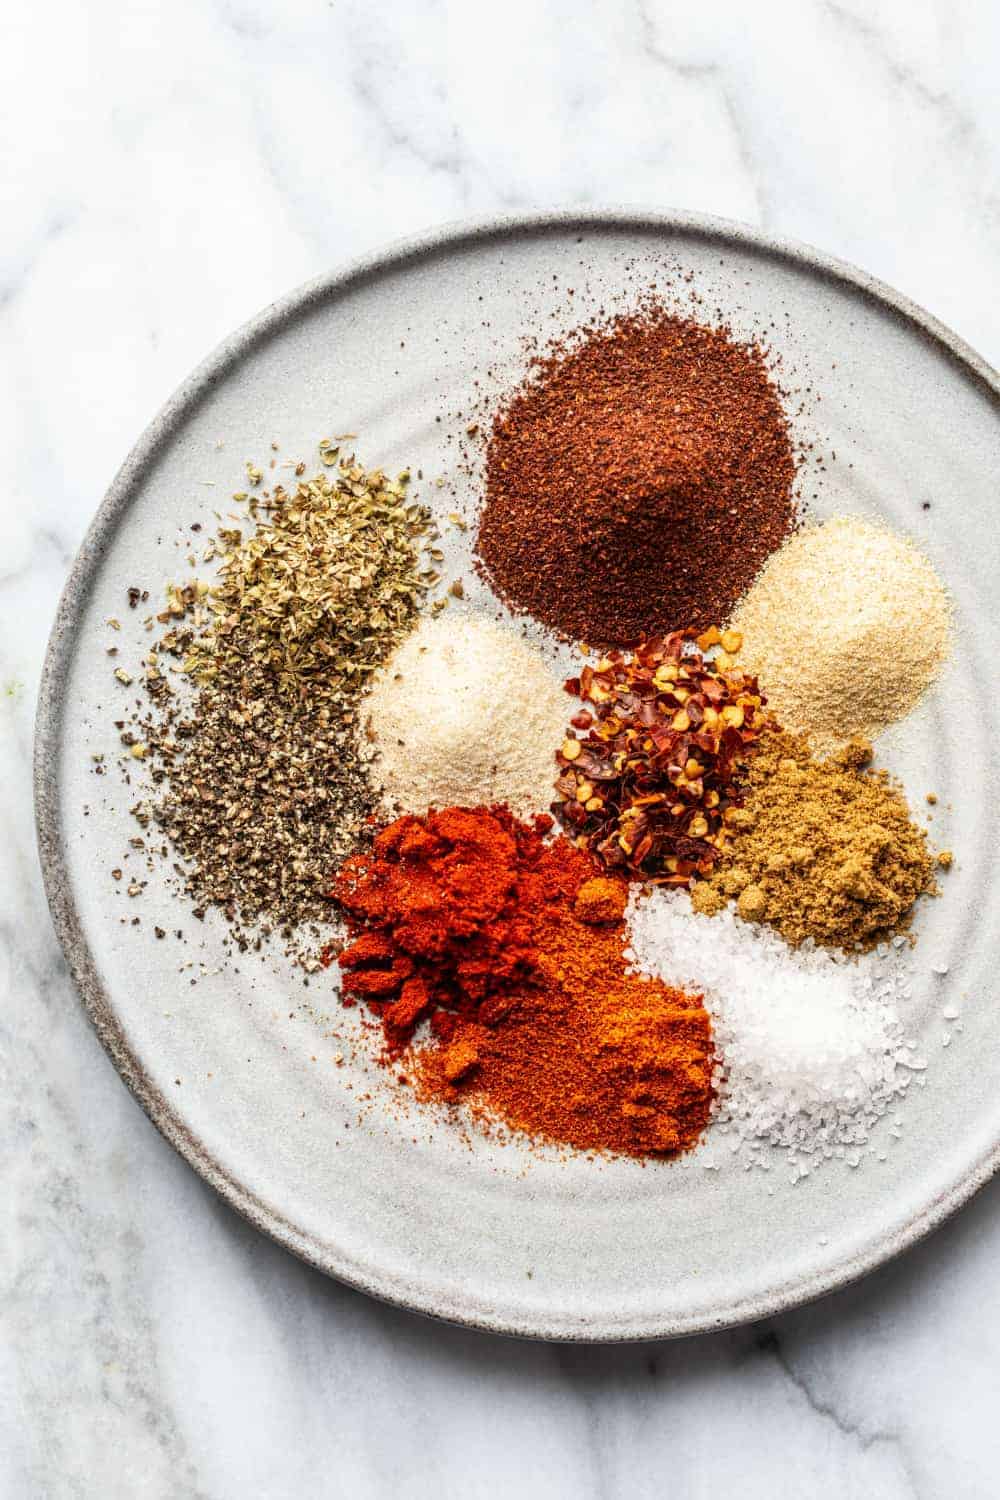 Spices for homemade taco seasoning arranged on a plate